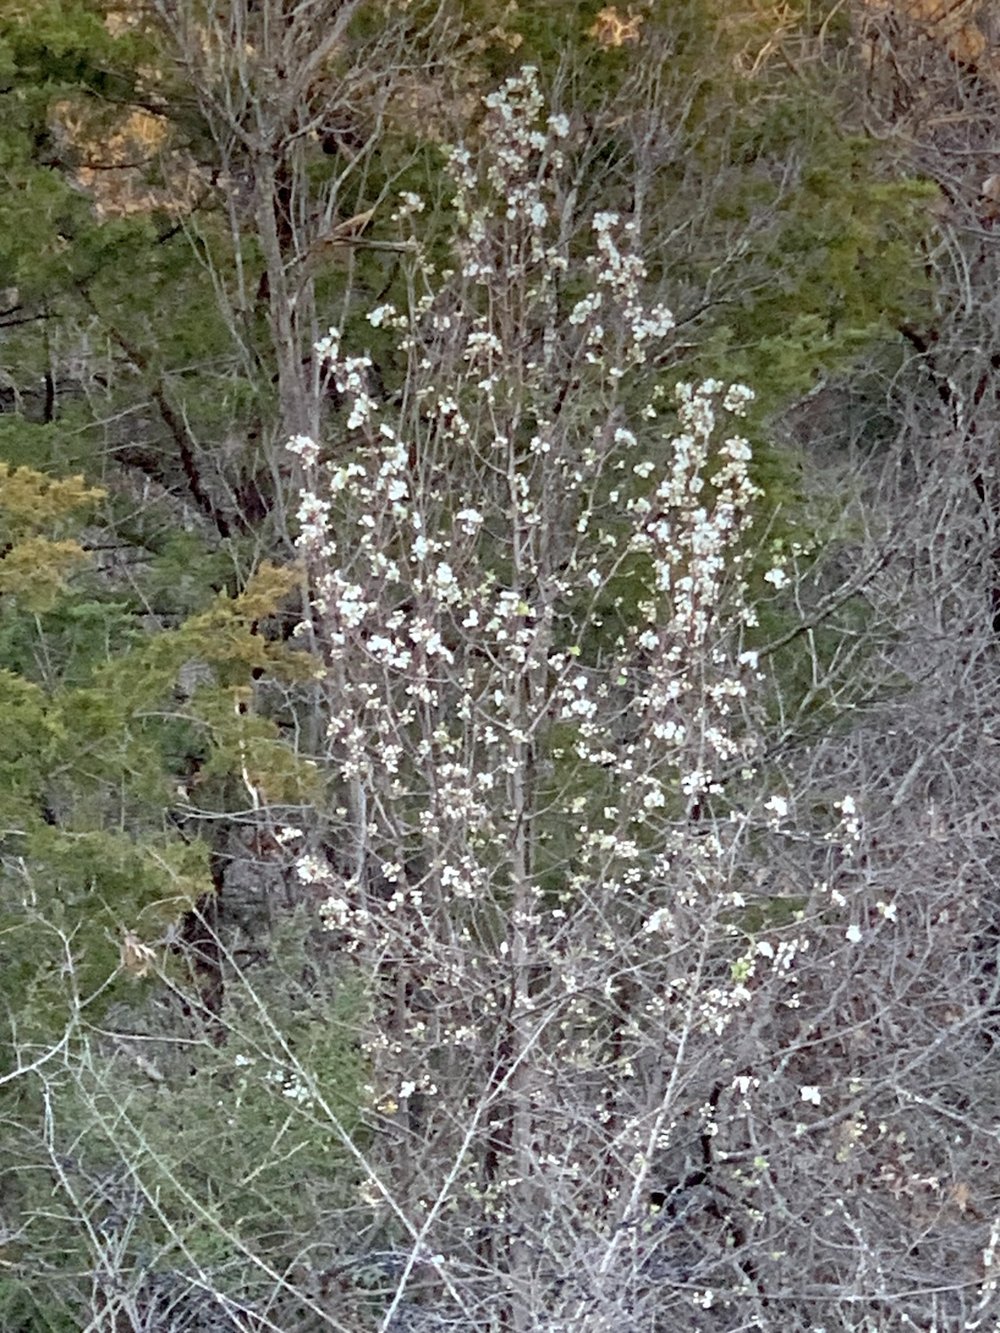  A  Plum  tree blooming a bit early on Feb. 24th. 